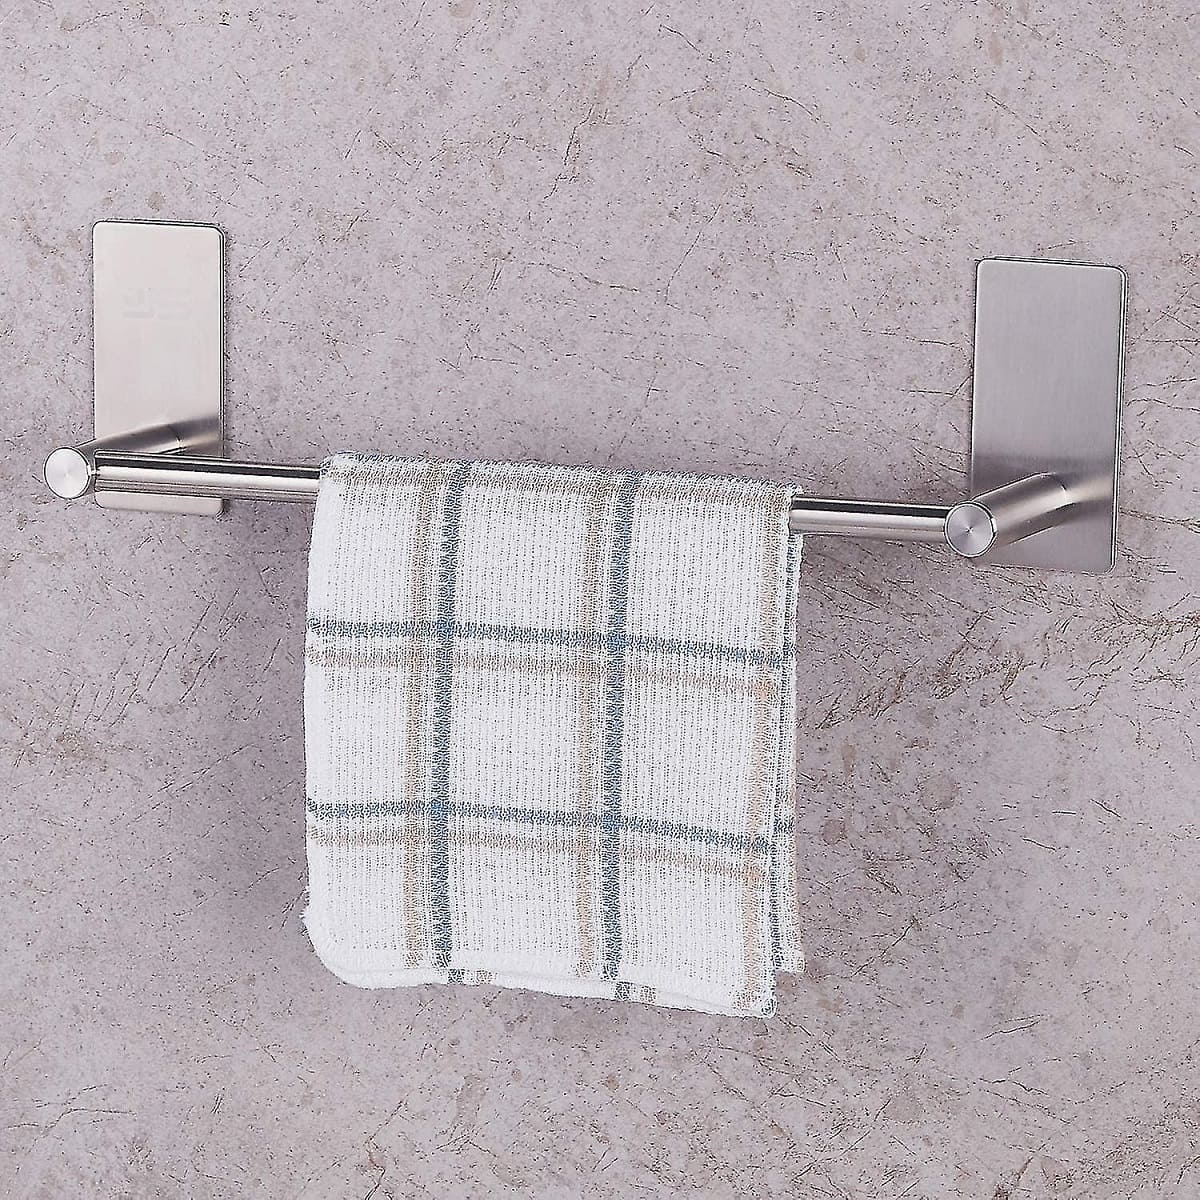 How To Remove Towel Bar With No Screws